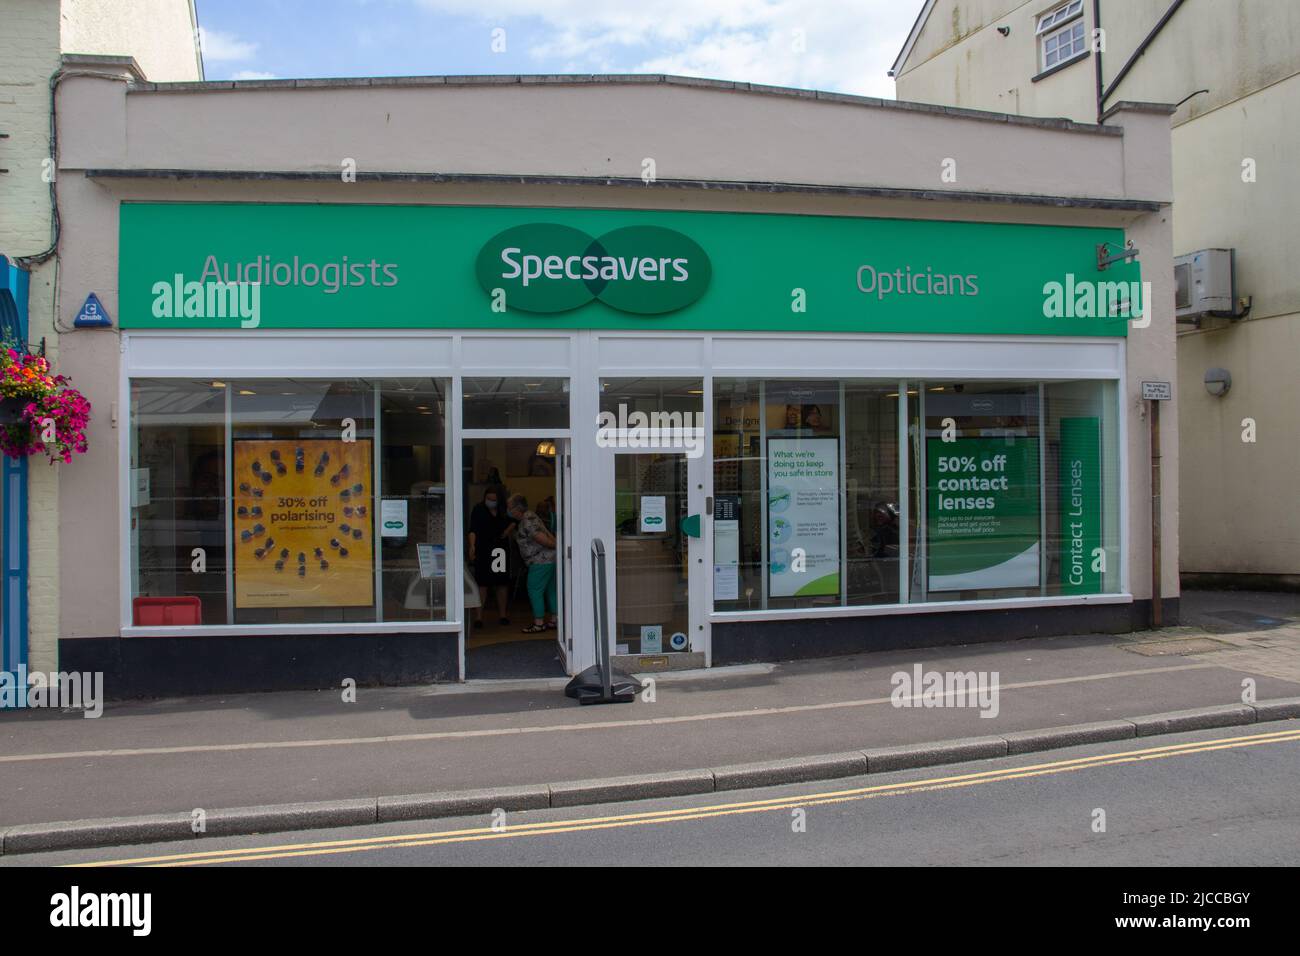 TIVERTON, UK - JUNE 30, 2021 branch of Specsavers opticians and audiologists on Gold Street Stock Photo